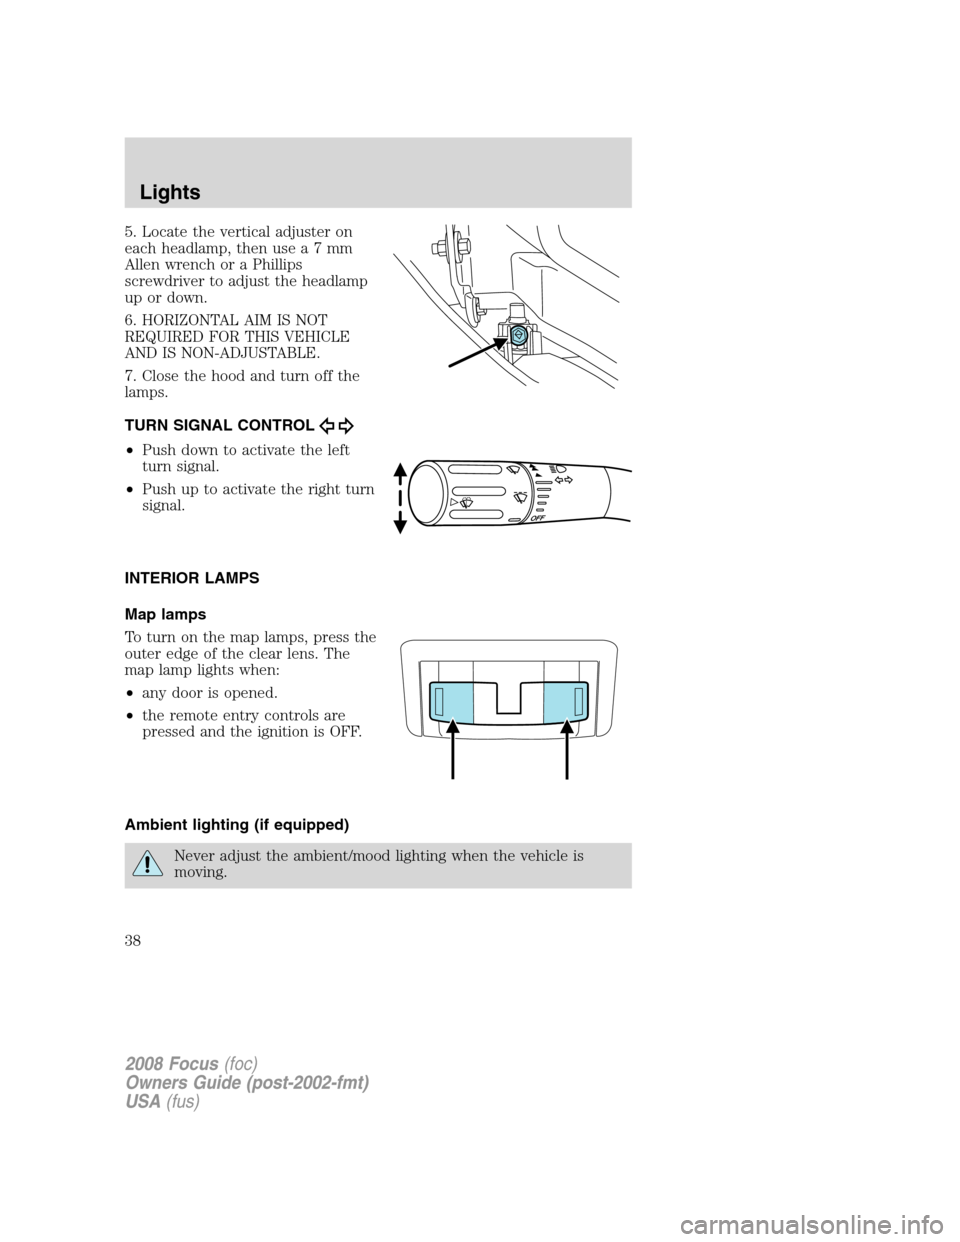 FORD FOCUS 2008 2.G Owners Guide 5. Locate the vertical adjuster on
each headlamp, then usea7mm
Allen wrench or a Phillips
screwdriver to adjust the headlamp
up or down.
6. HORIZONTAL AIM IS NOT
REQUIRED FOR THIS VEHICLE
AND IS NON-A